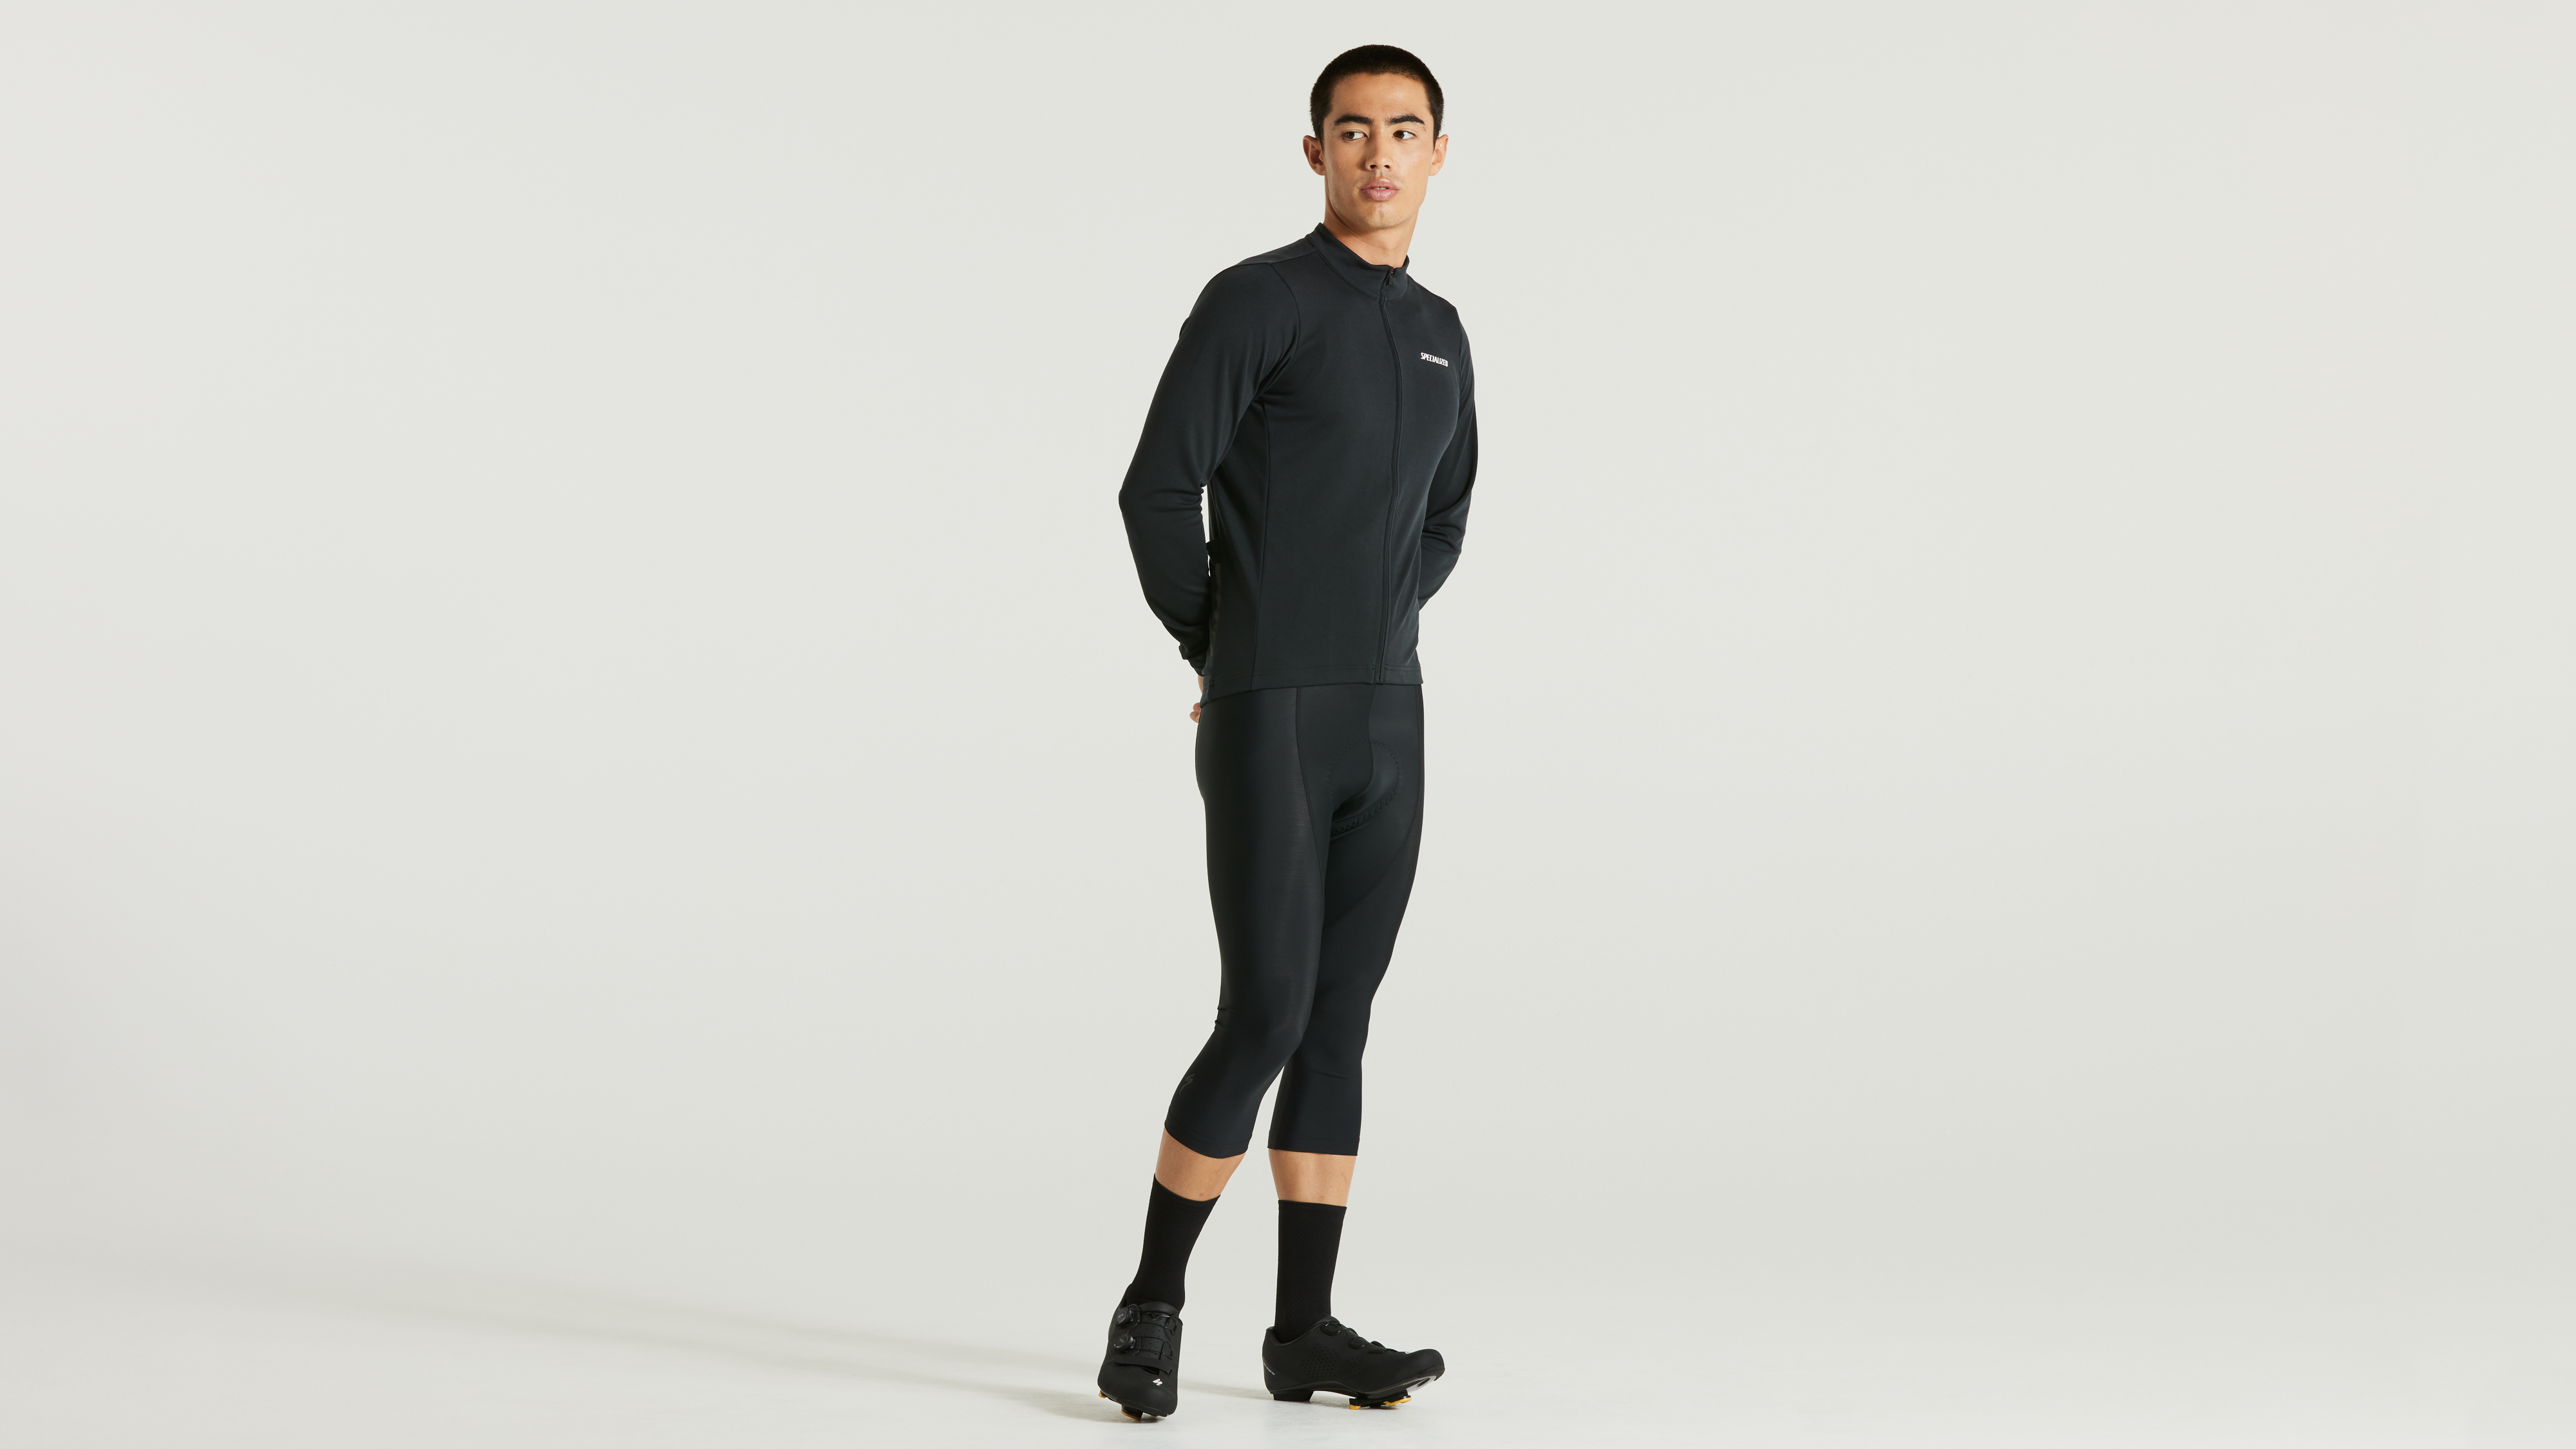 https://assets.specialized.com/i/specialized/64221-240_APP_RBX-CYCLING-KNICKER-MEN-BLK-M_HERO?$scom-pdp-product-image$&fmt=auto